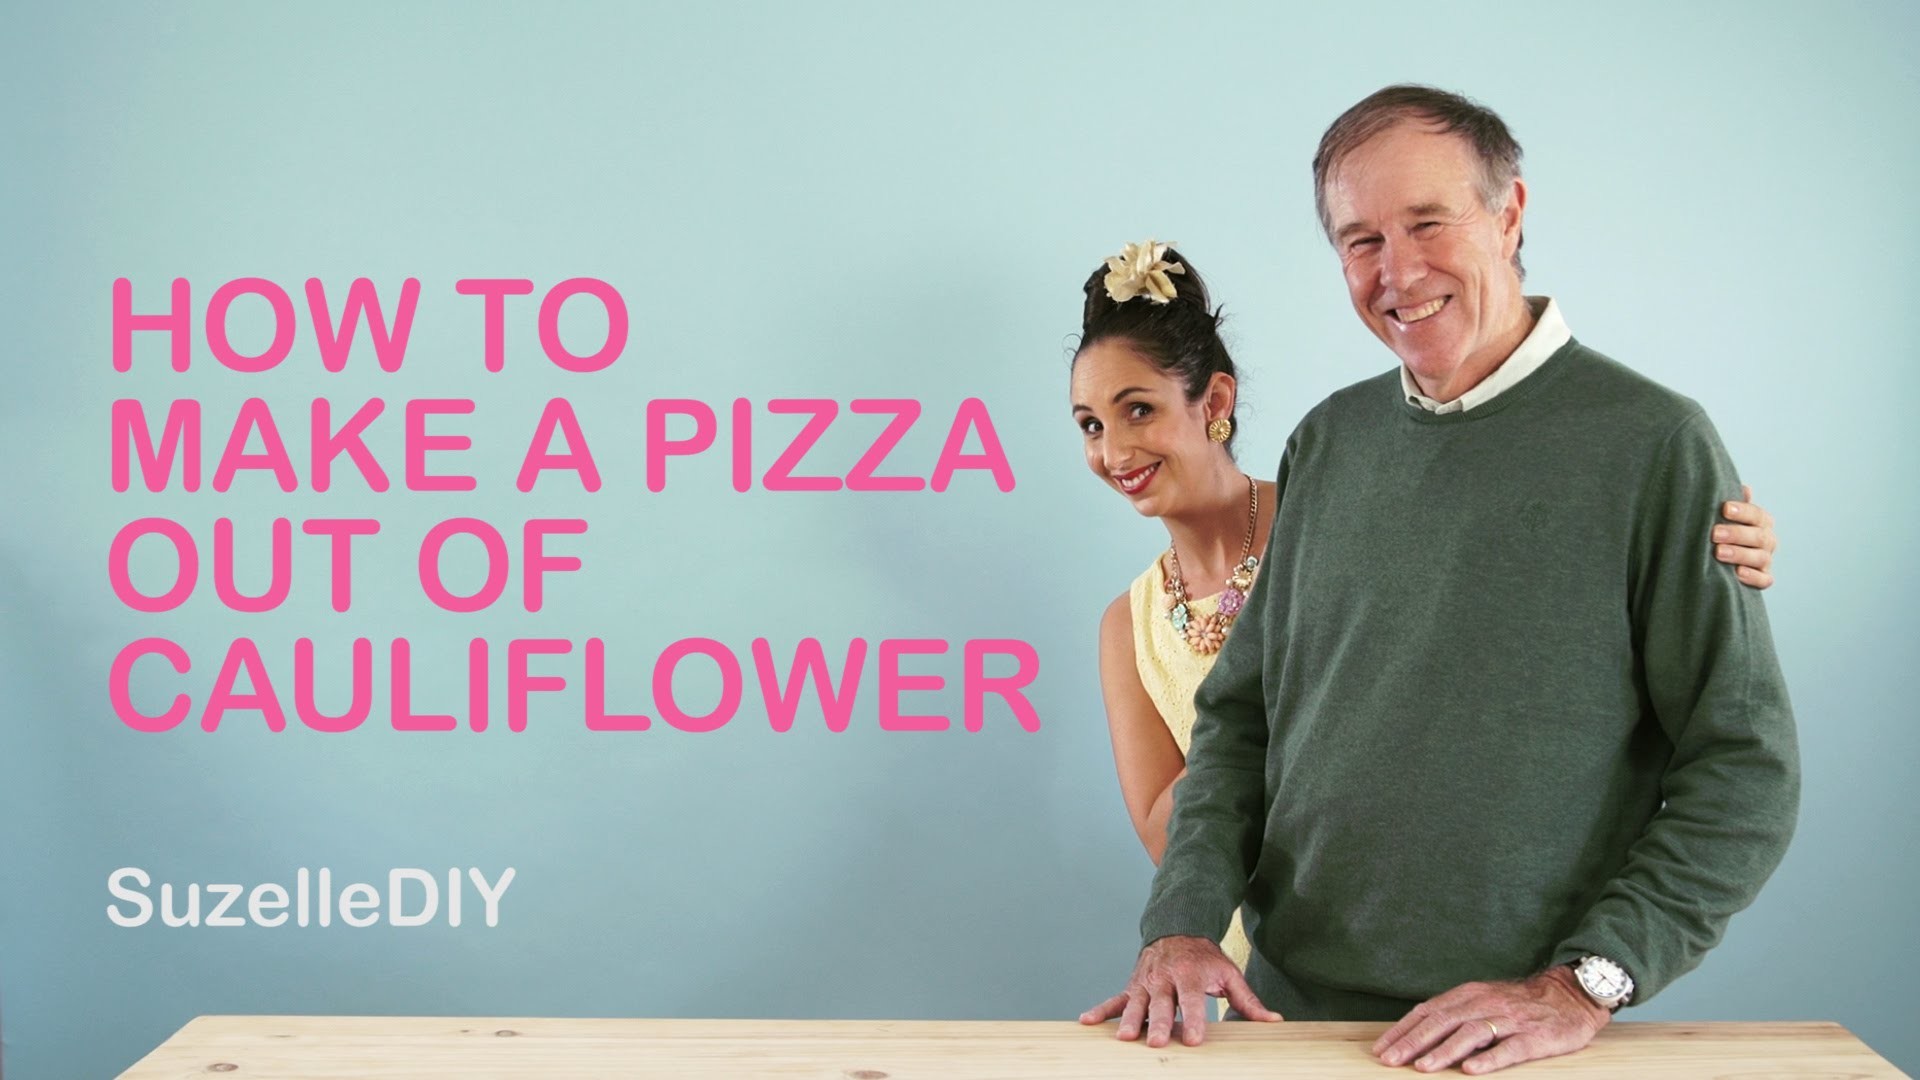 SuzelleDIY - How to Make a Pizza out of Cauliflower